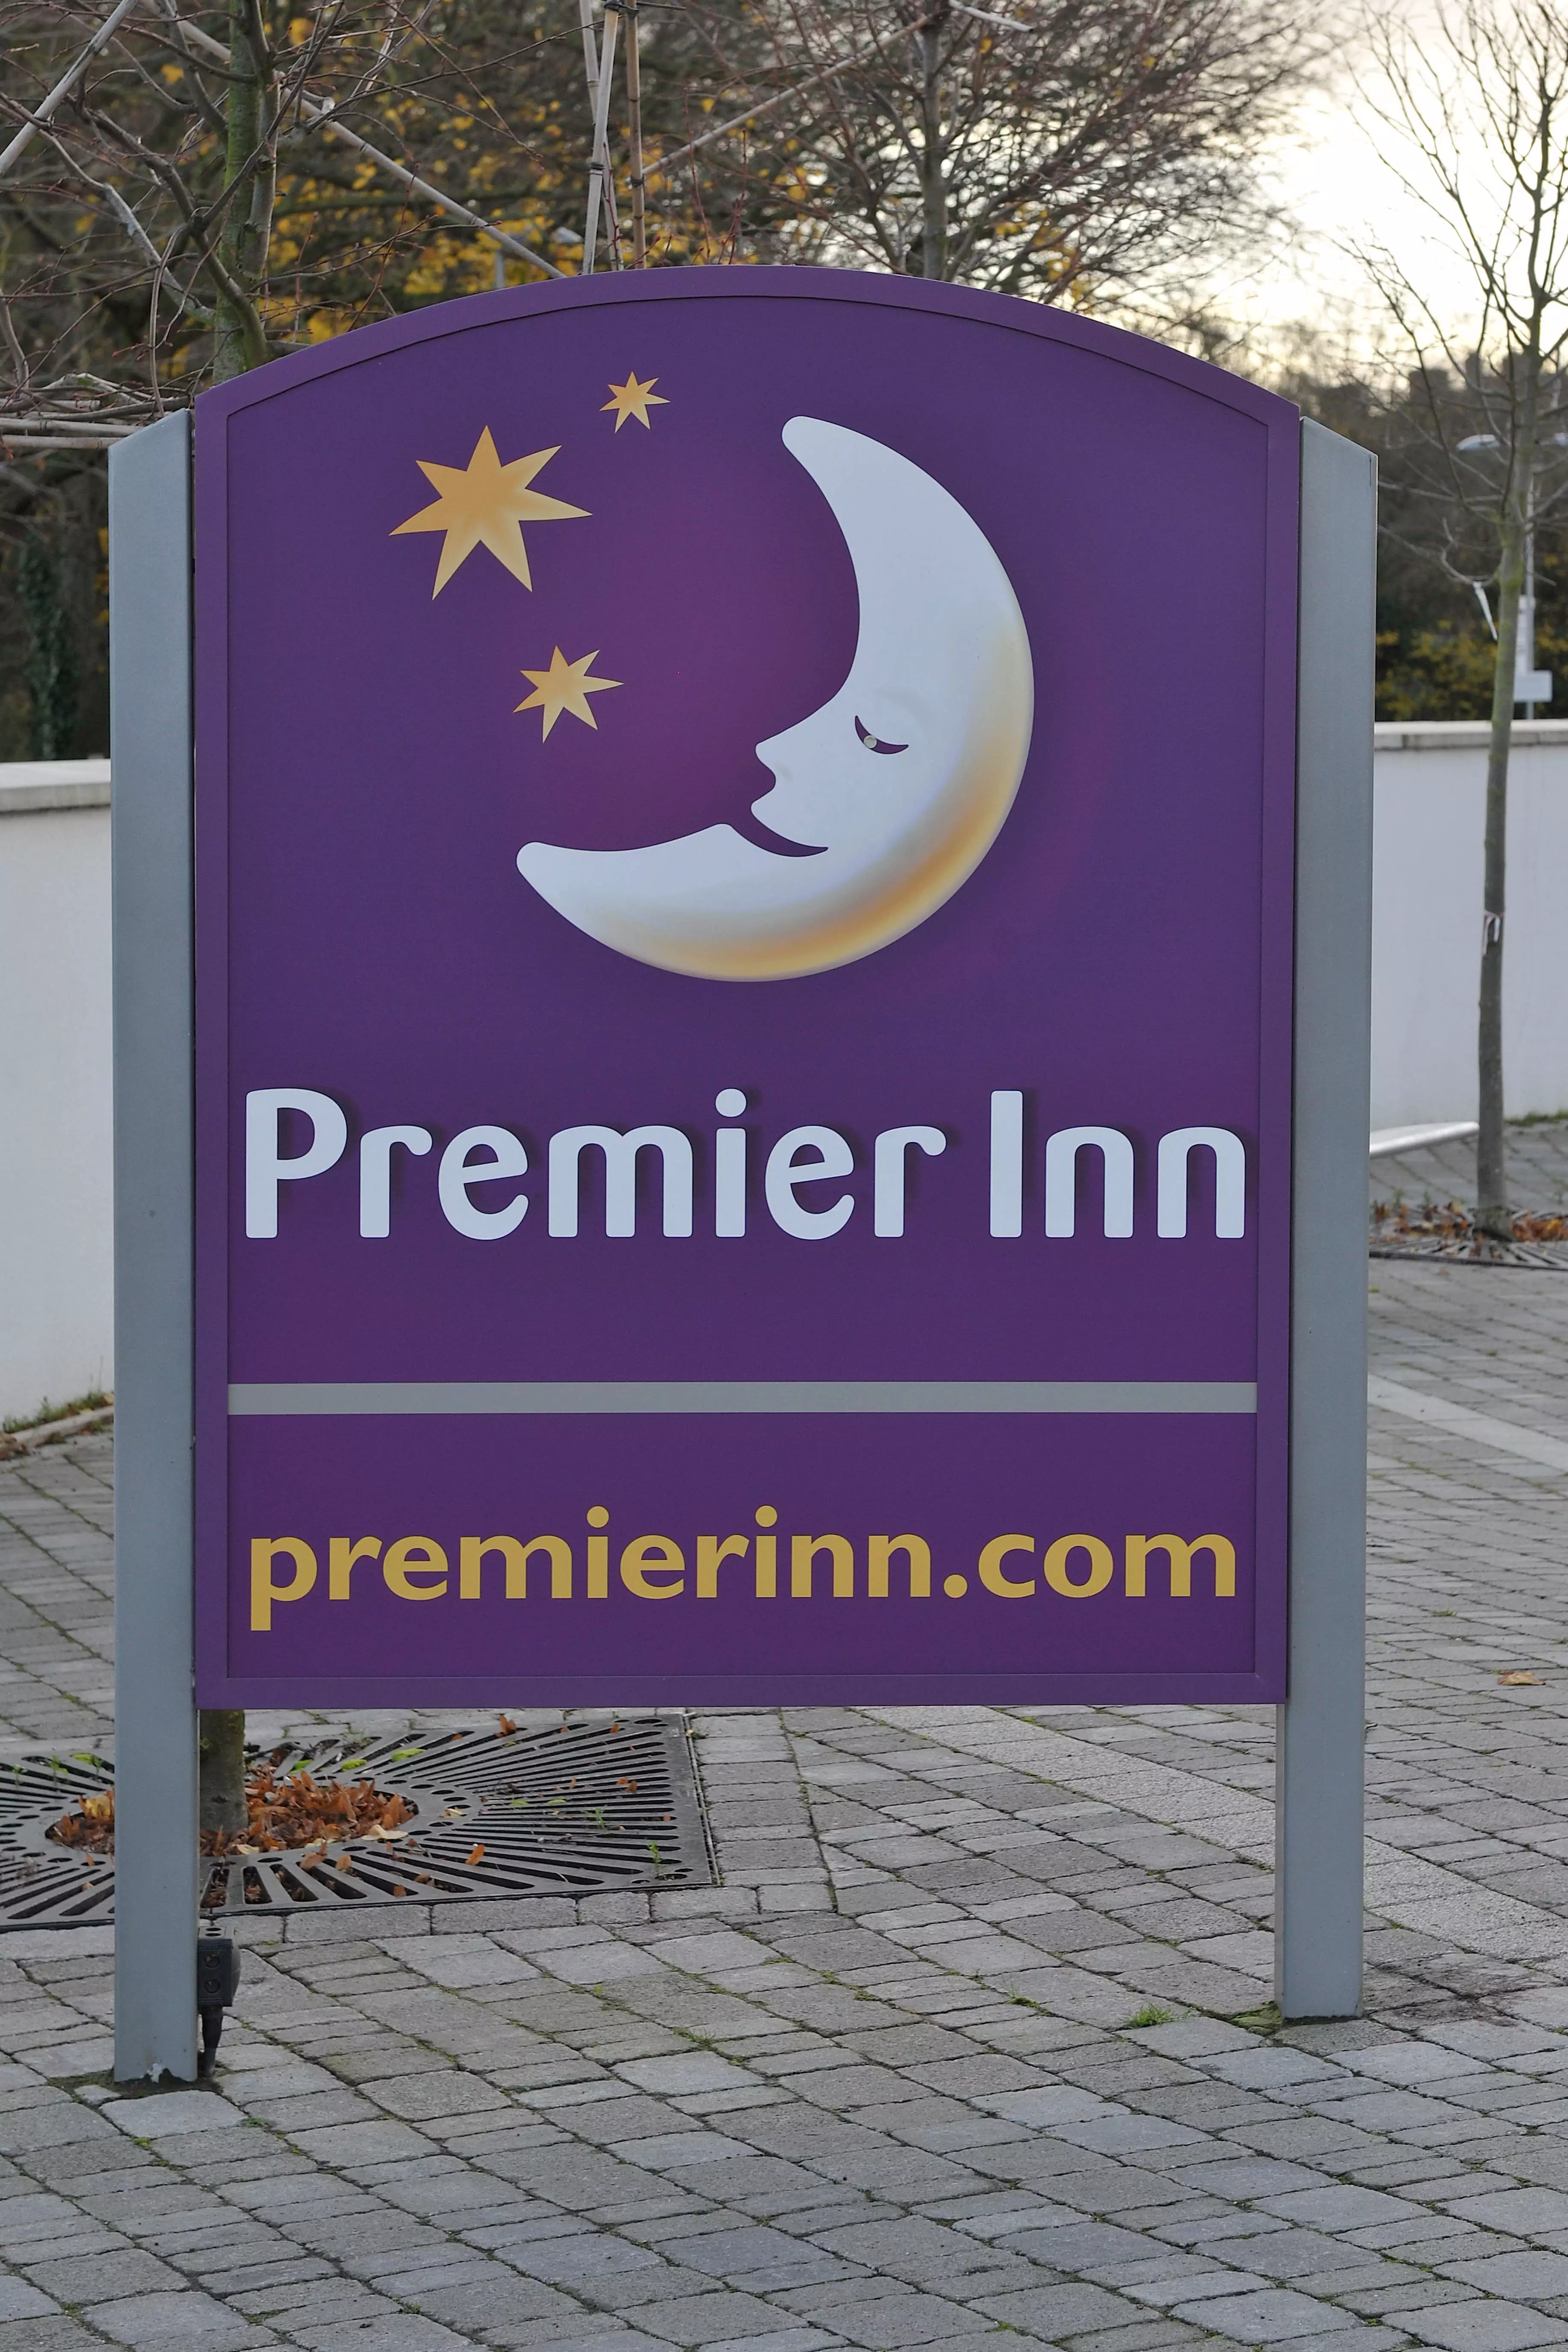 This is the offending Premier Inn sign.